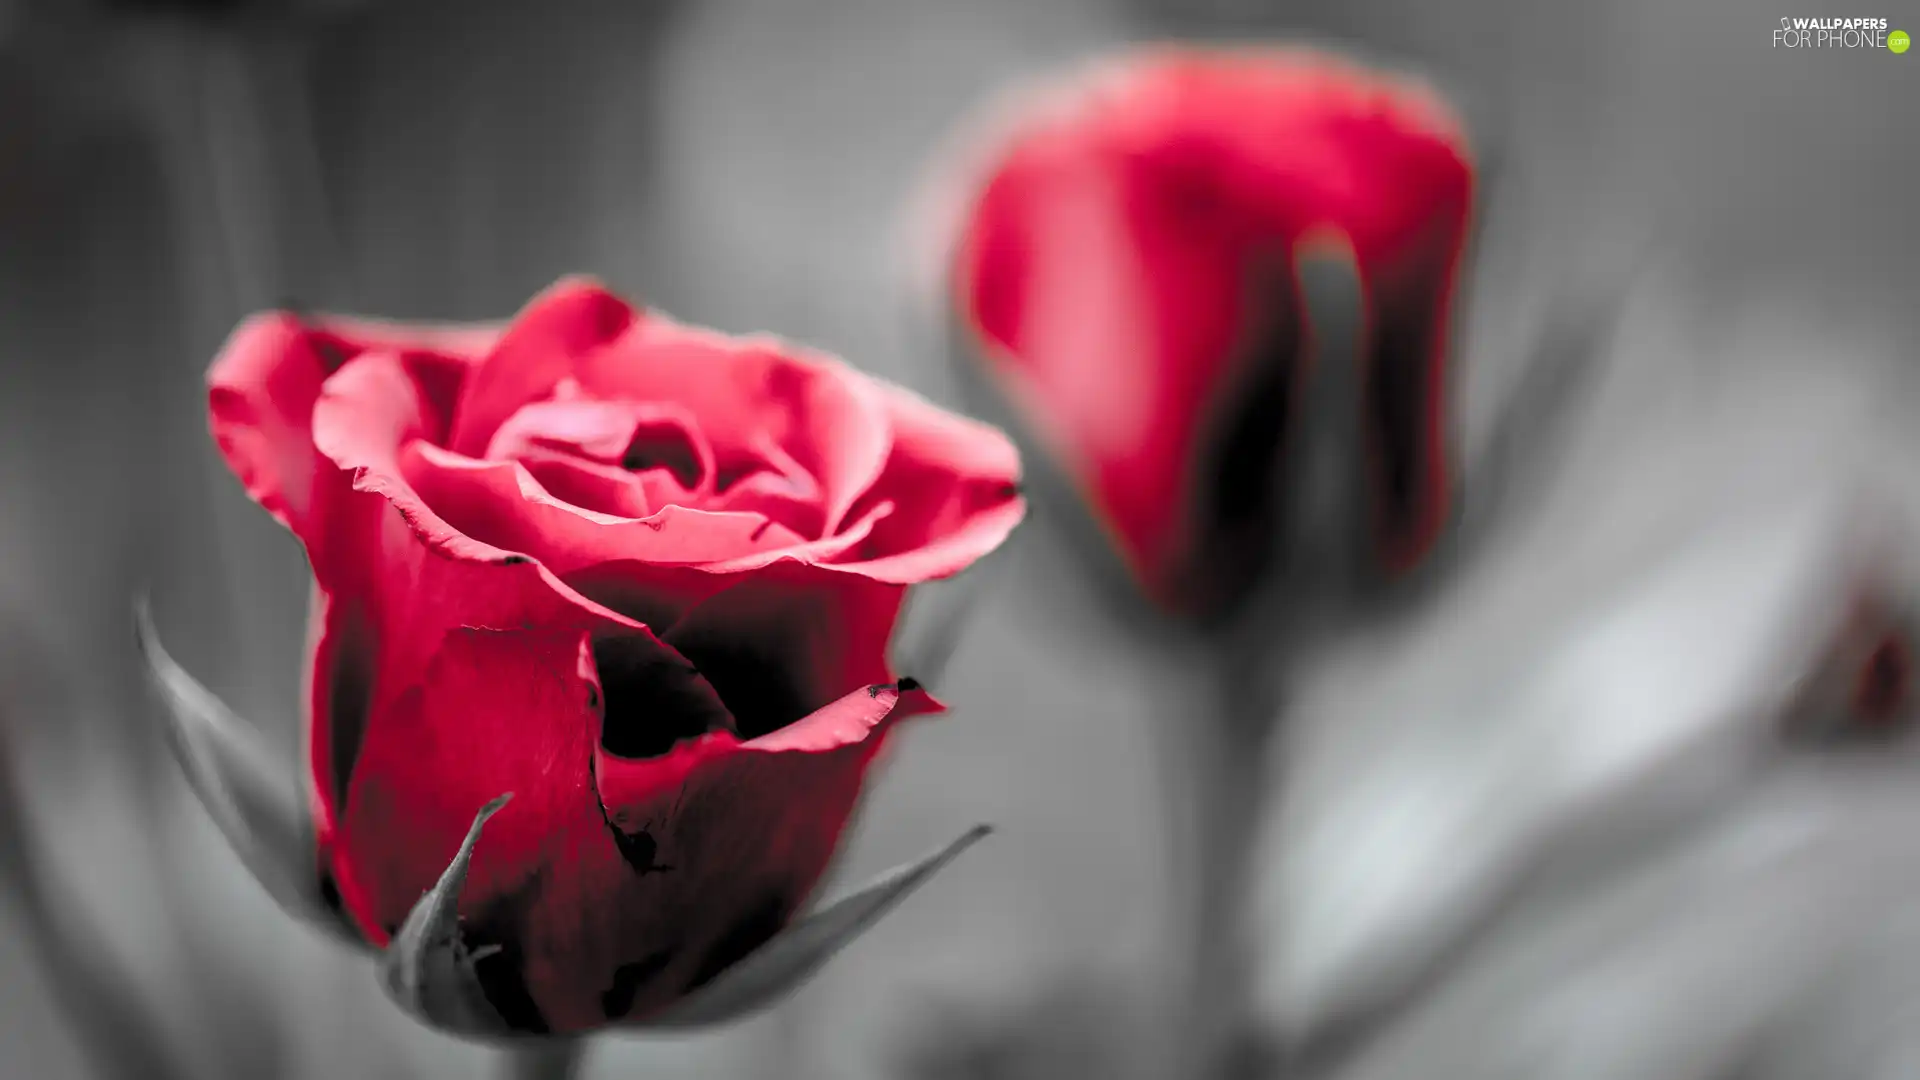 fuzzy, background, rose, bud, red hot